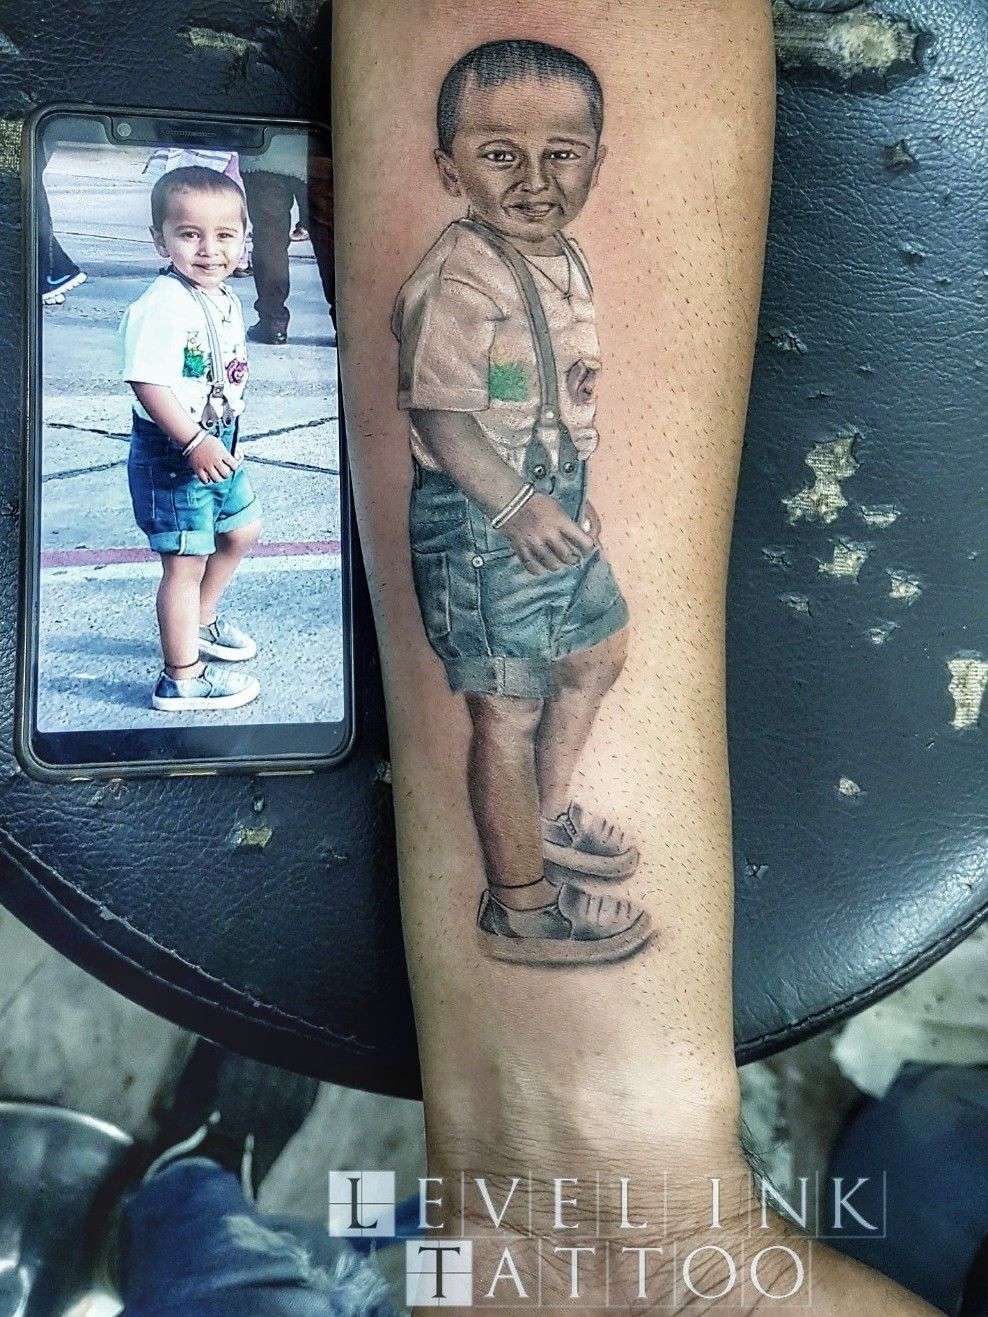 Tattoo Uploaded By Level Ink Tattoos Baby Portrait At Level Ink Tattoos Tattoodo